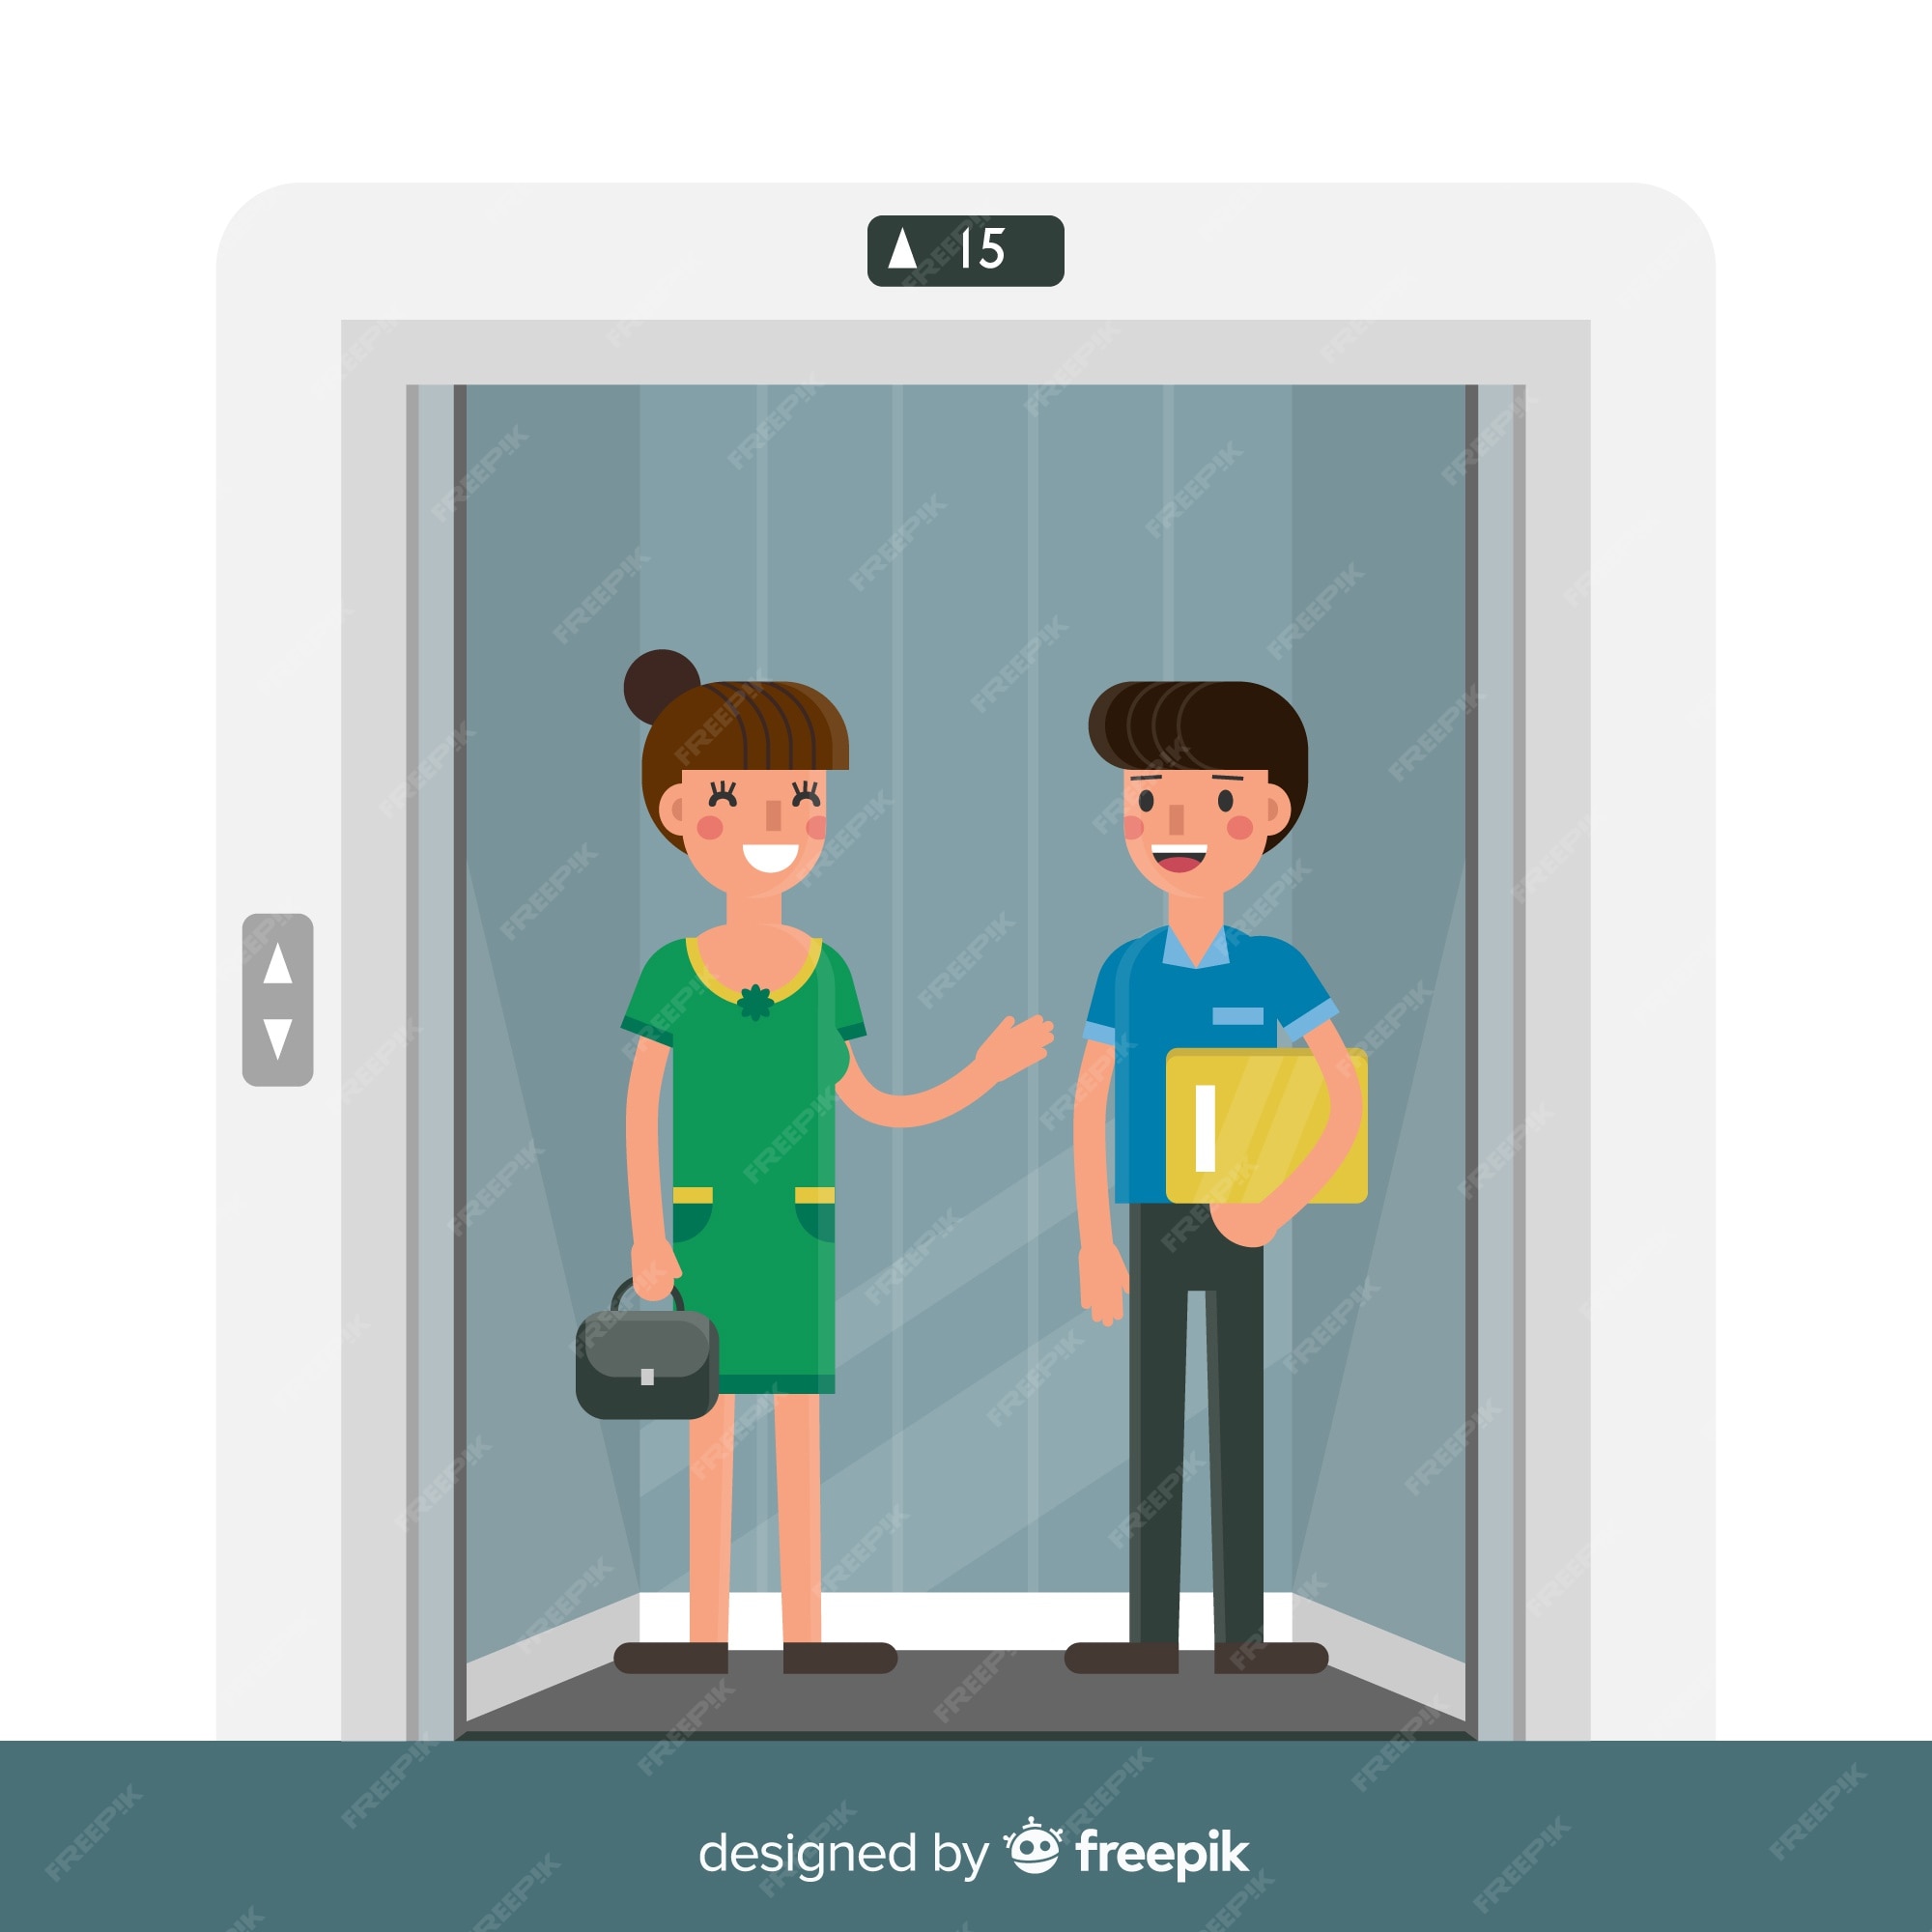 Free Vector | Friendly couple in elevator